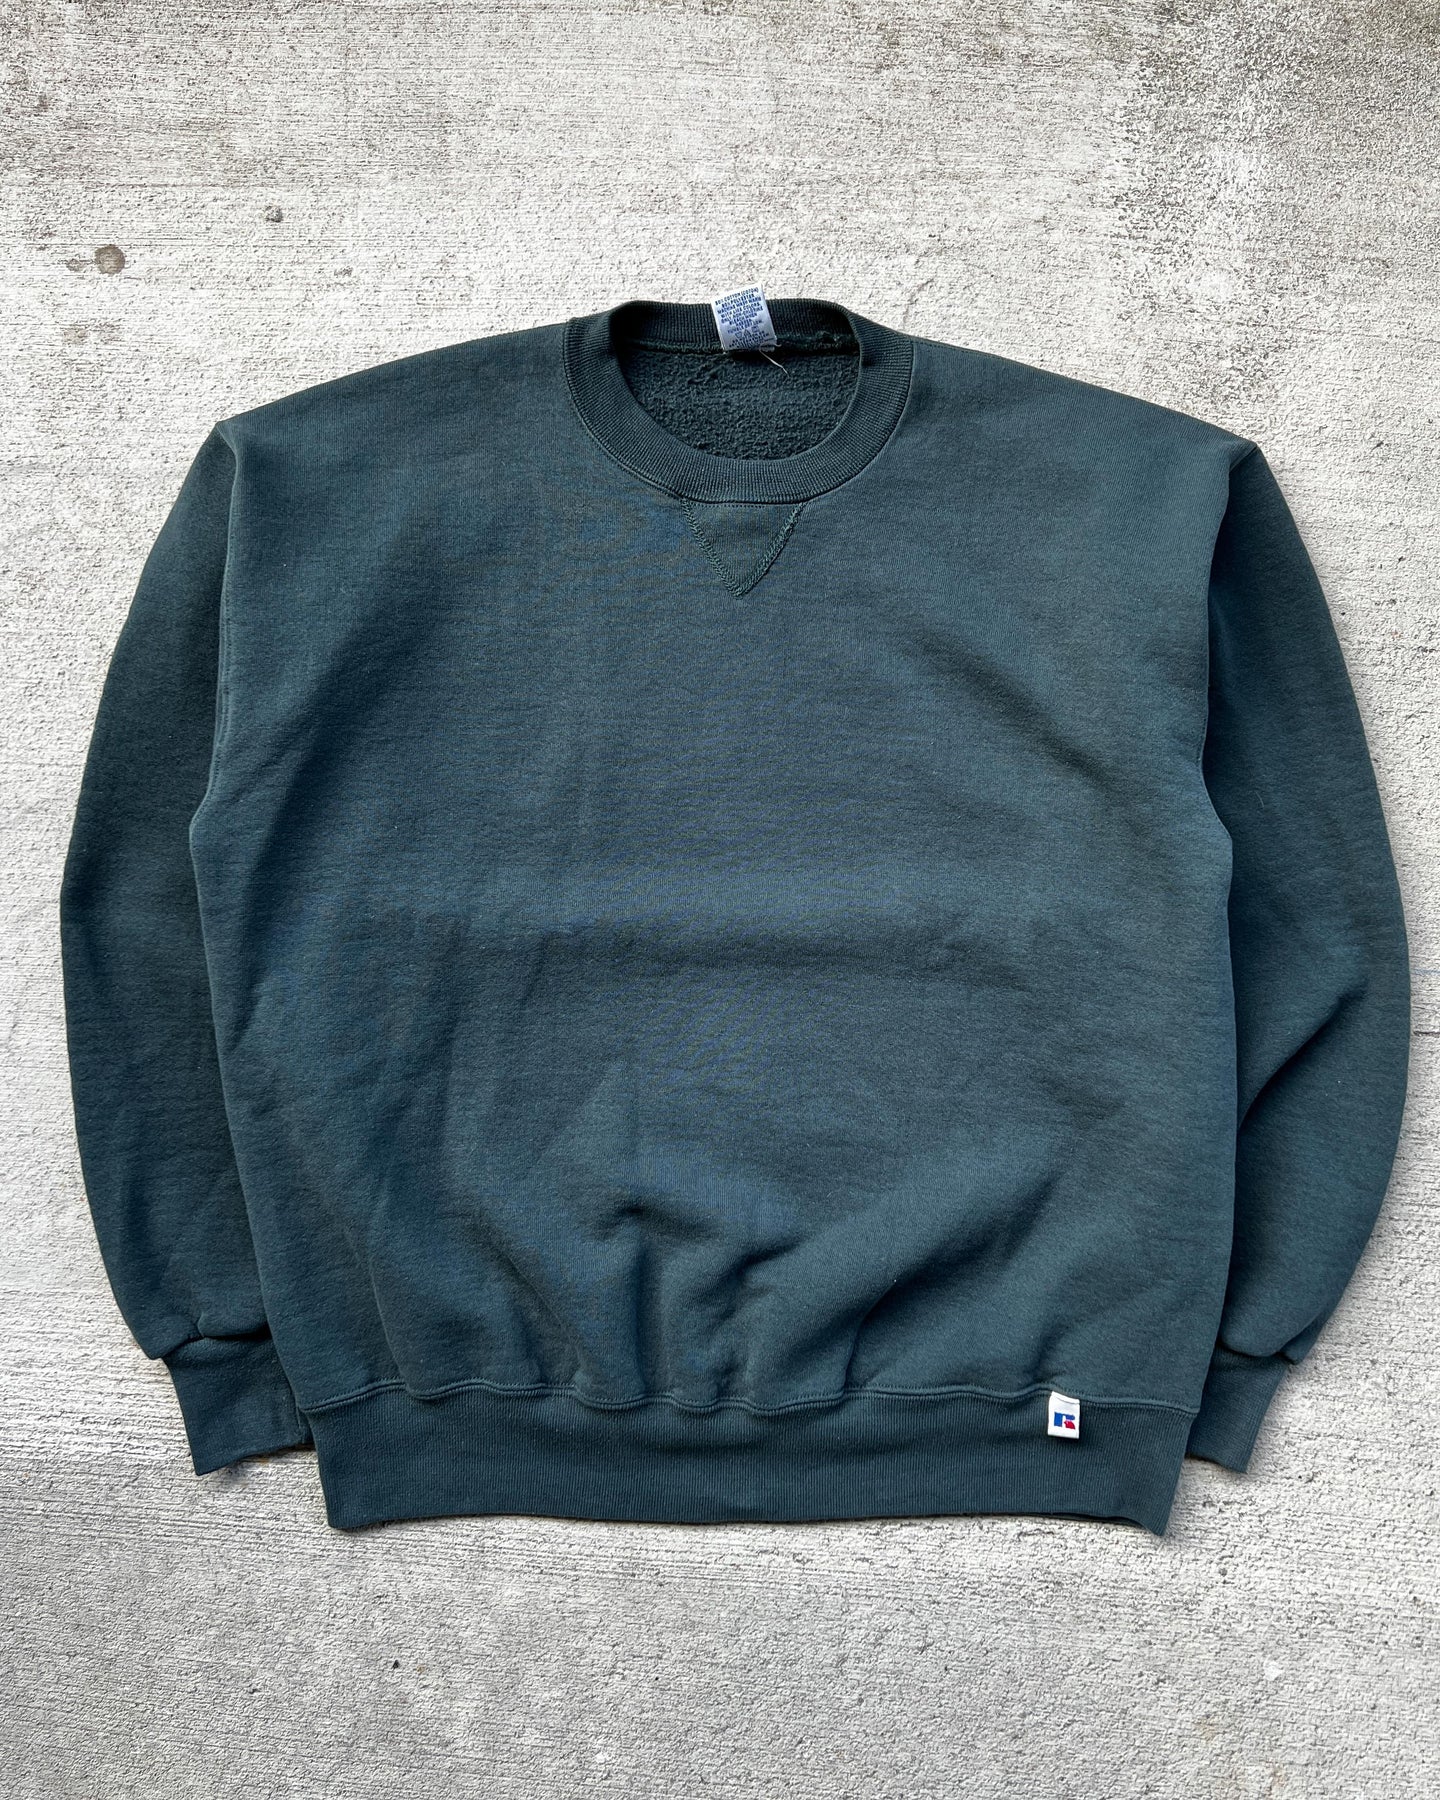 1990s Russell Athletic Sea Green Crewneck - Size Large